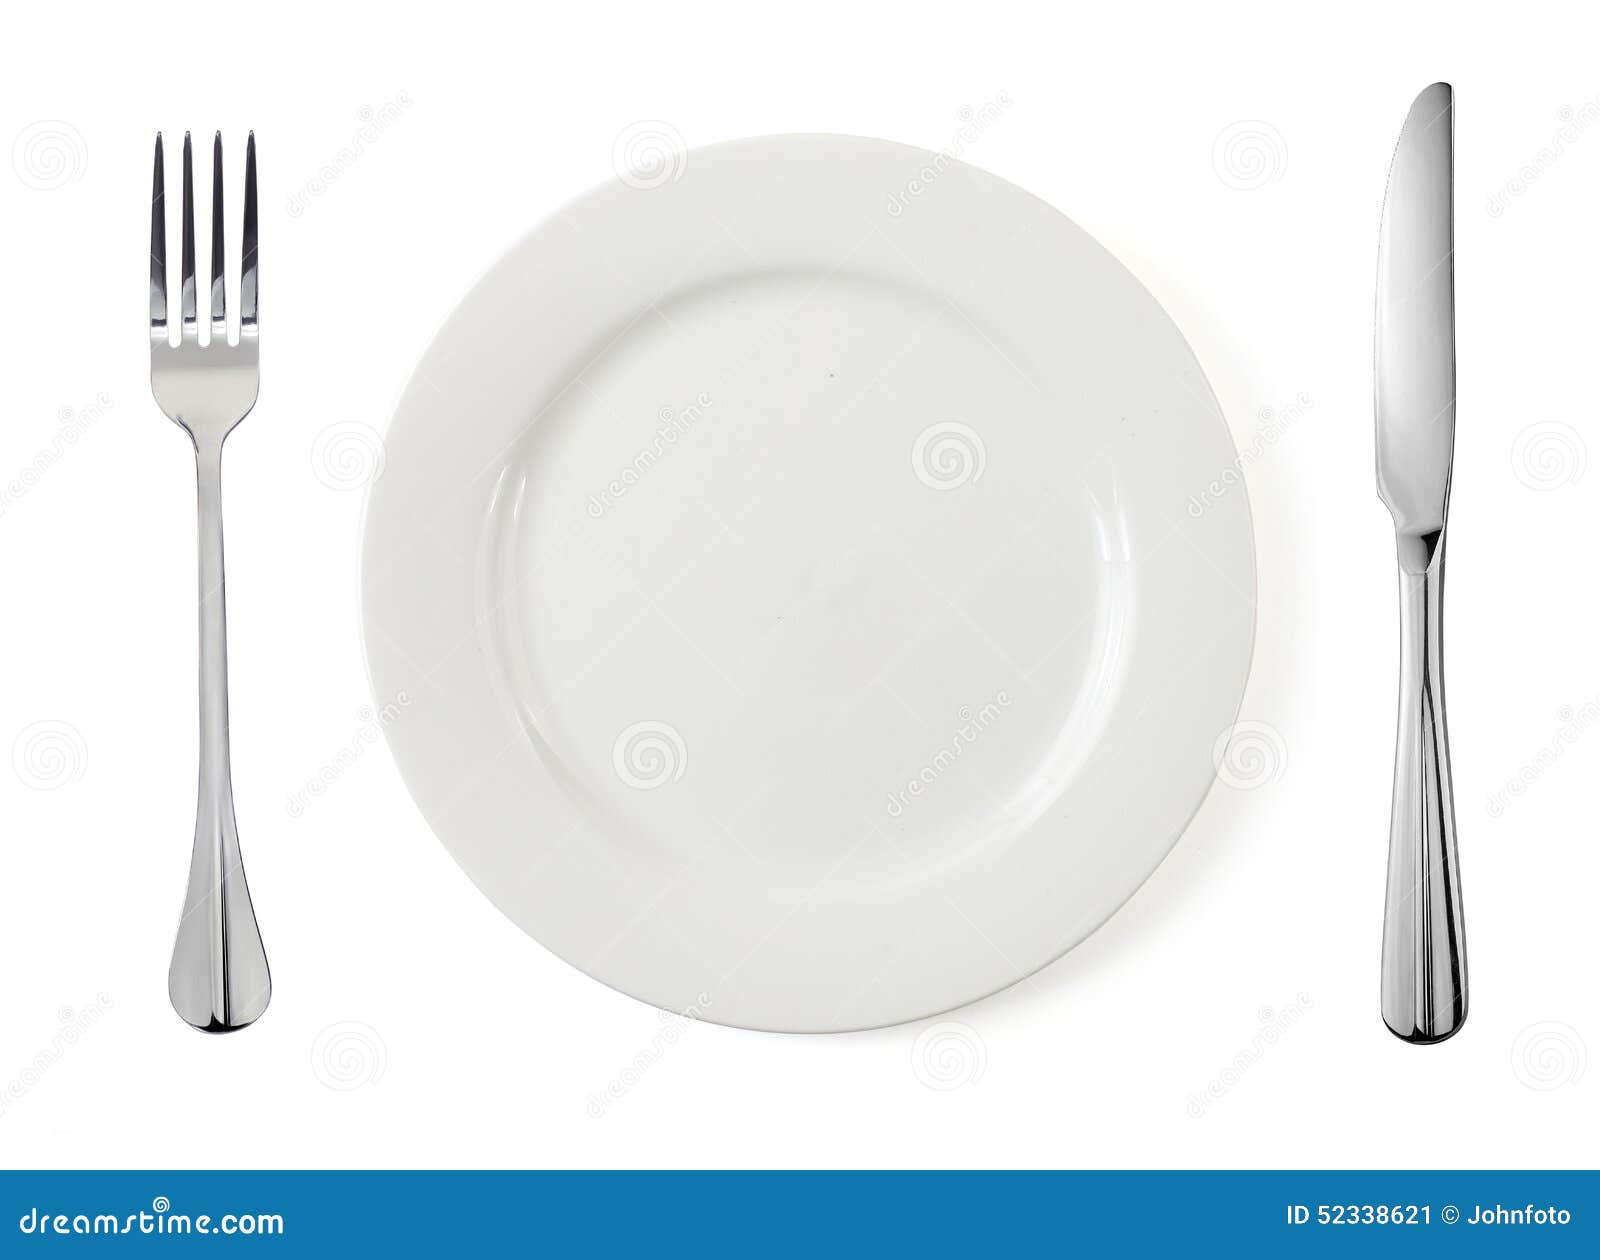 empty plate with fork and knife